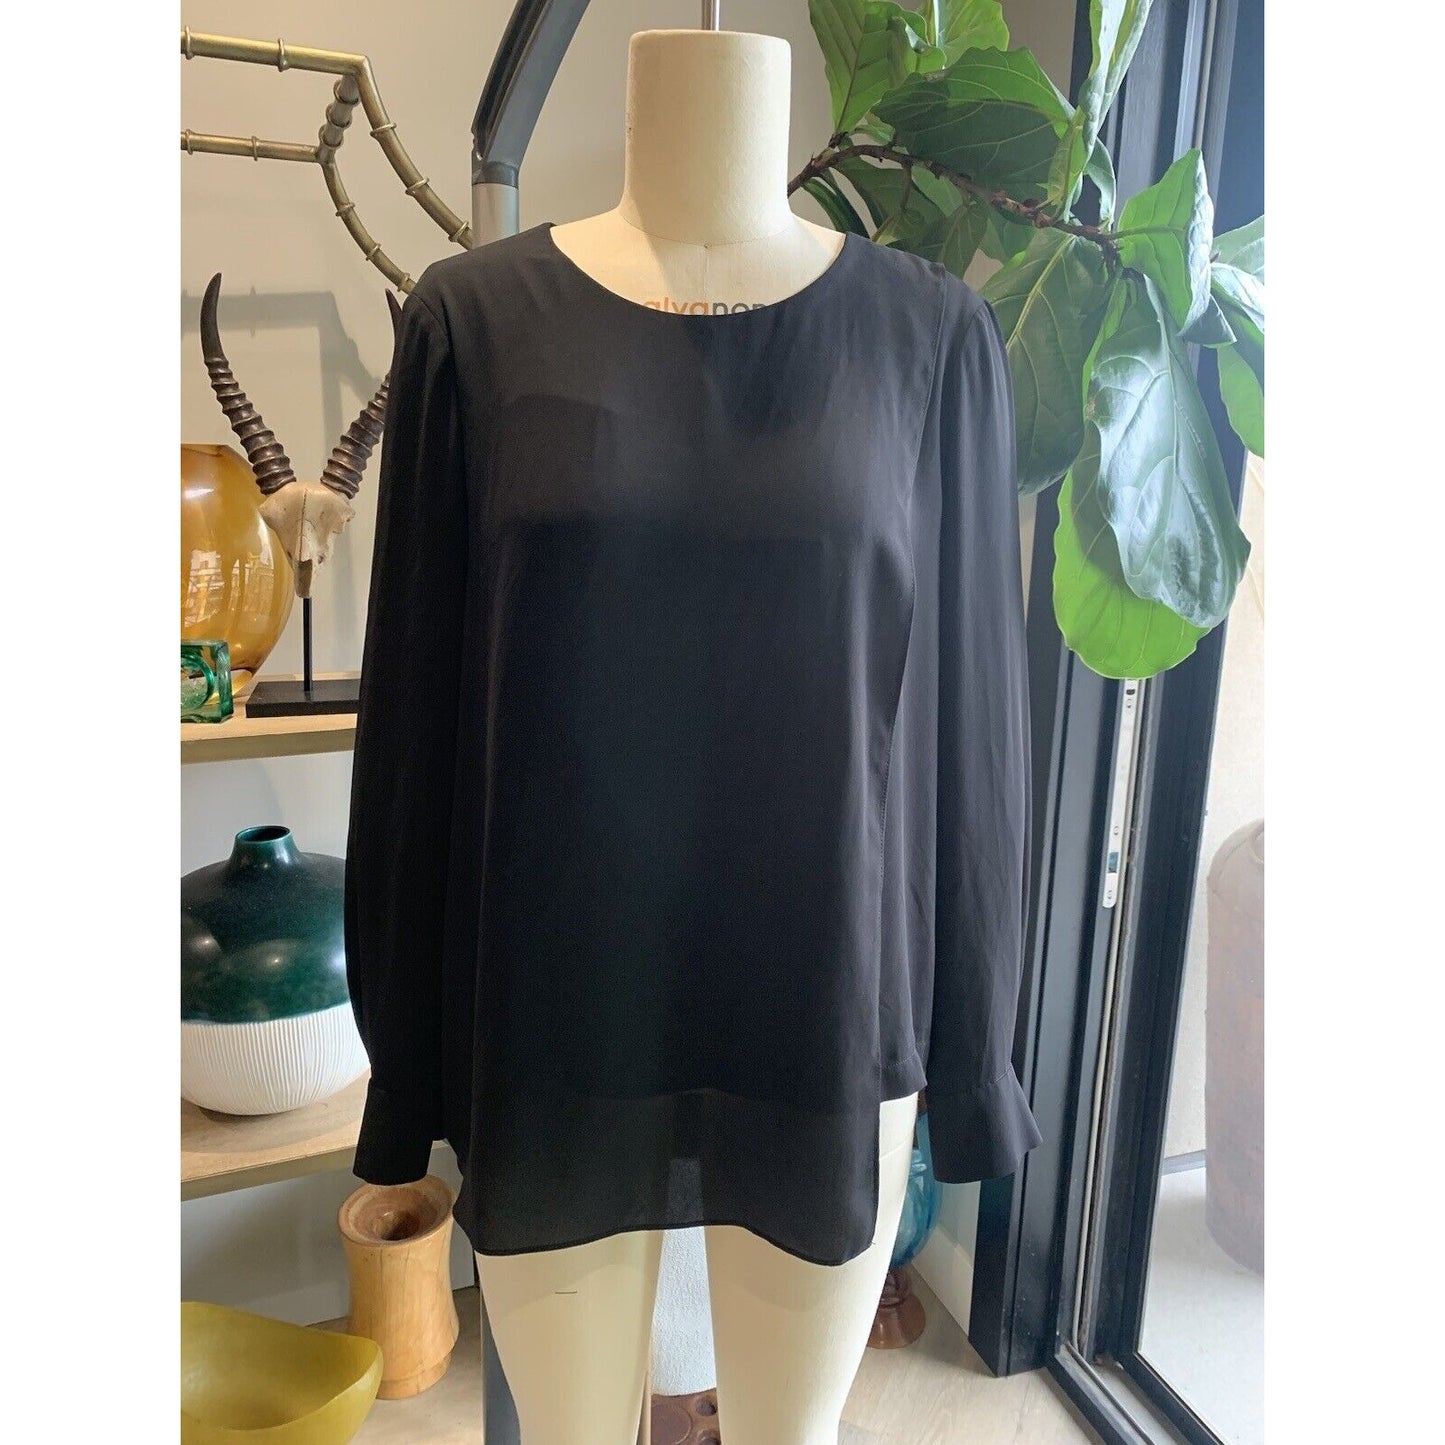 Front View Of Black Women's Blouse